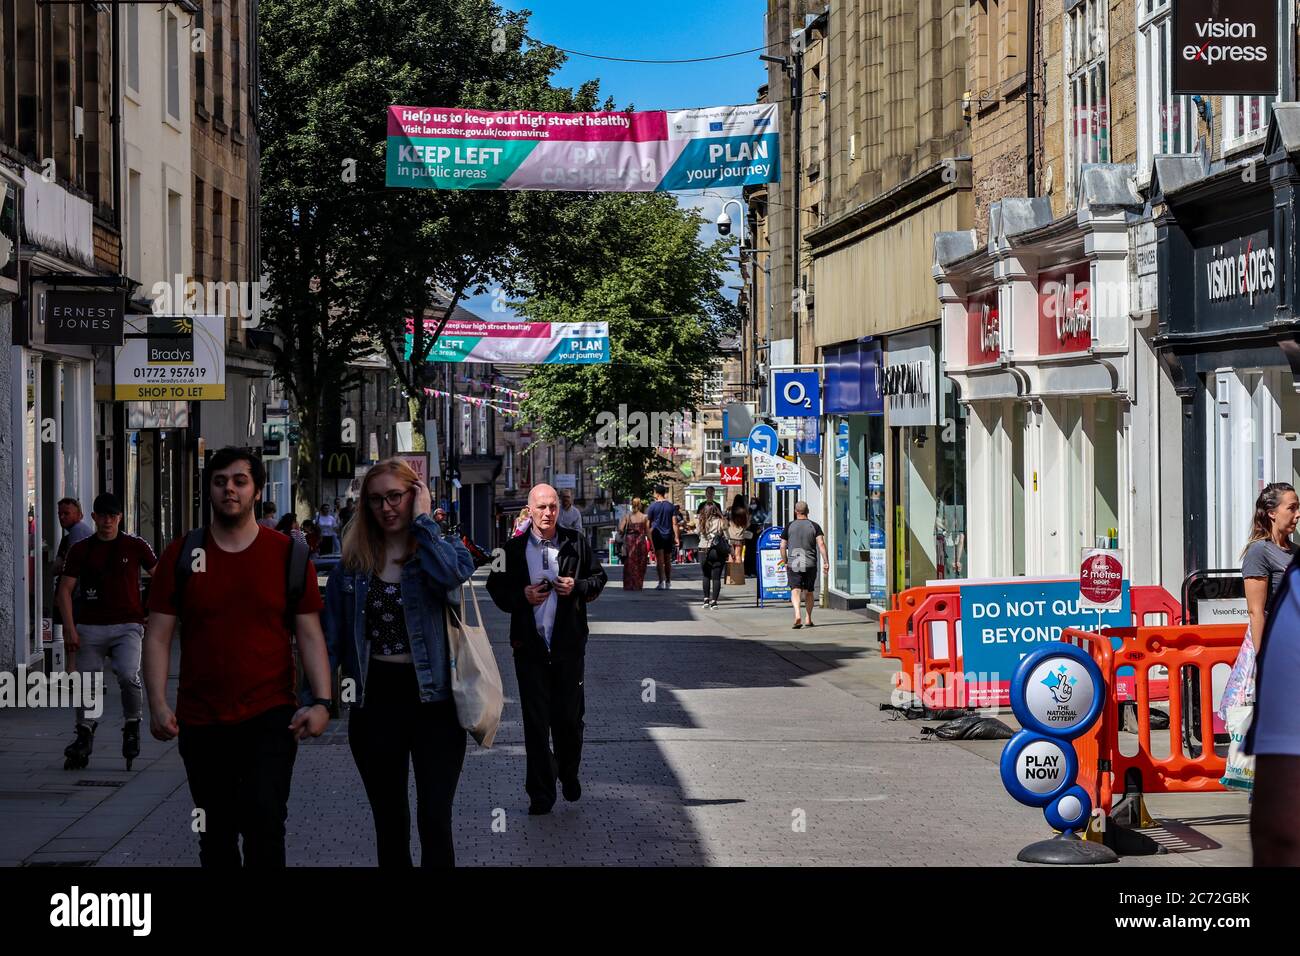 Lancaster, United Kingdom. 12th July, 2020. High street in Lancaste still remains quite although there are some shoppers that are begining to visdit the High Street Credit: PN News/Alamy Live News Stock Photo